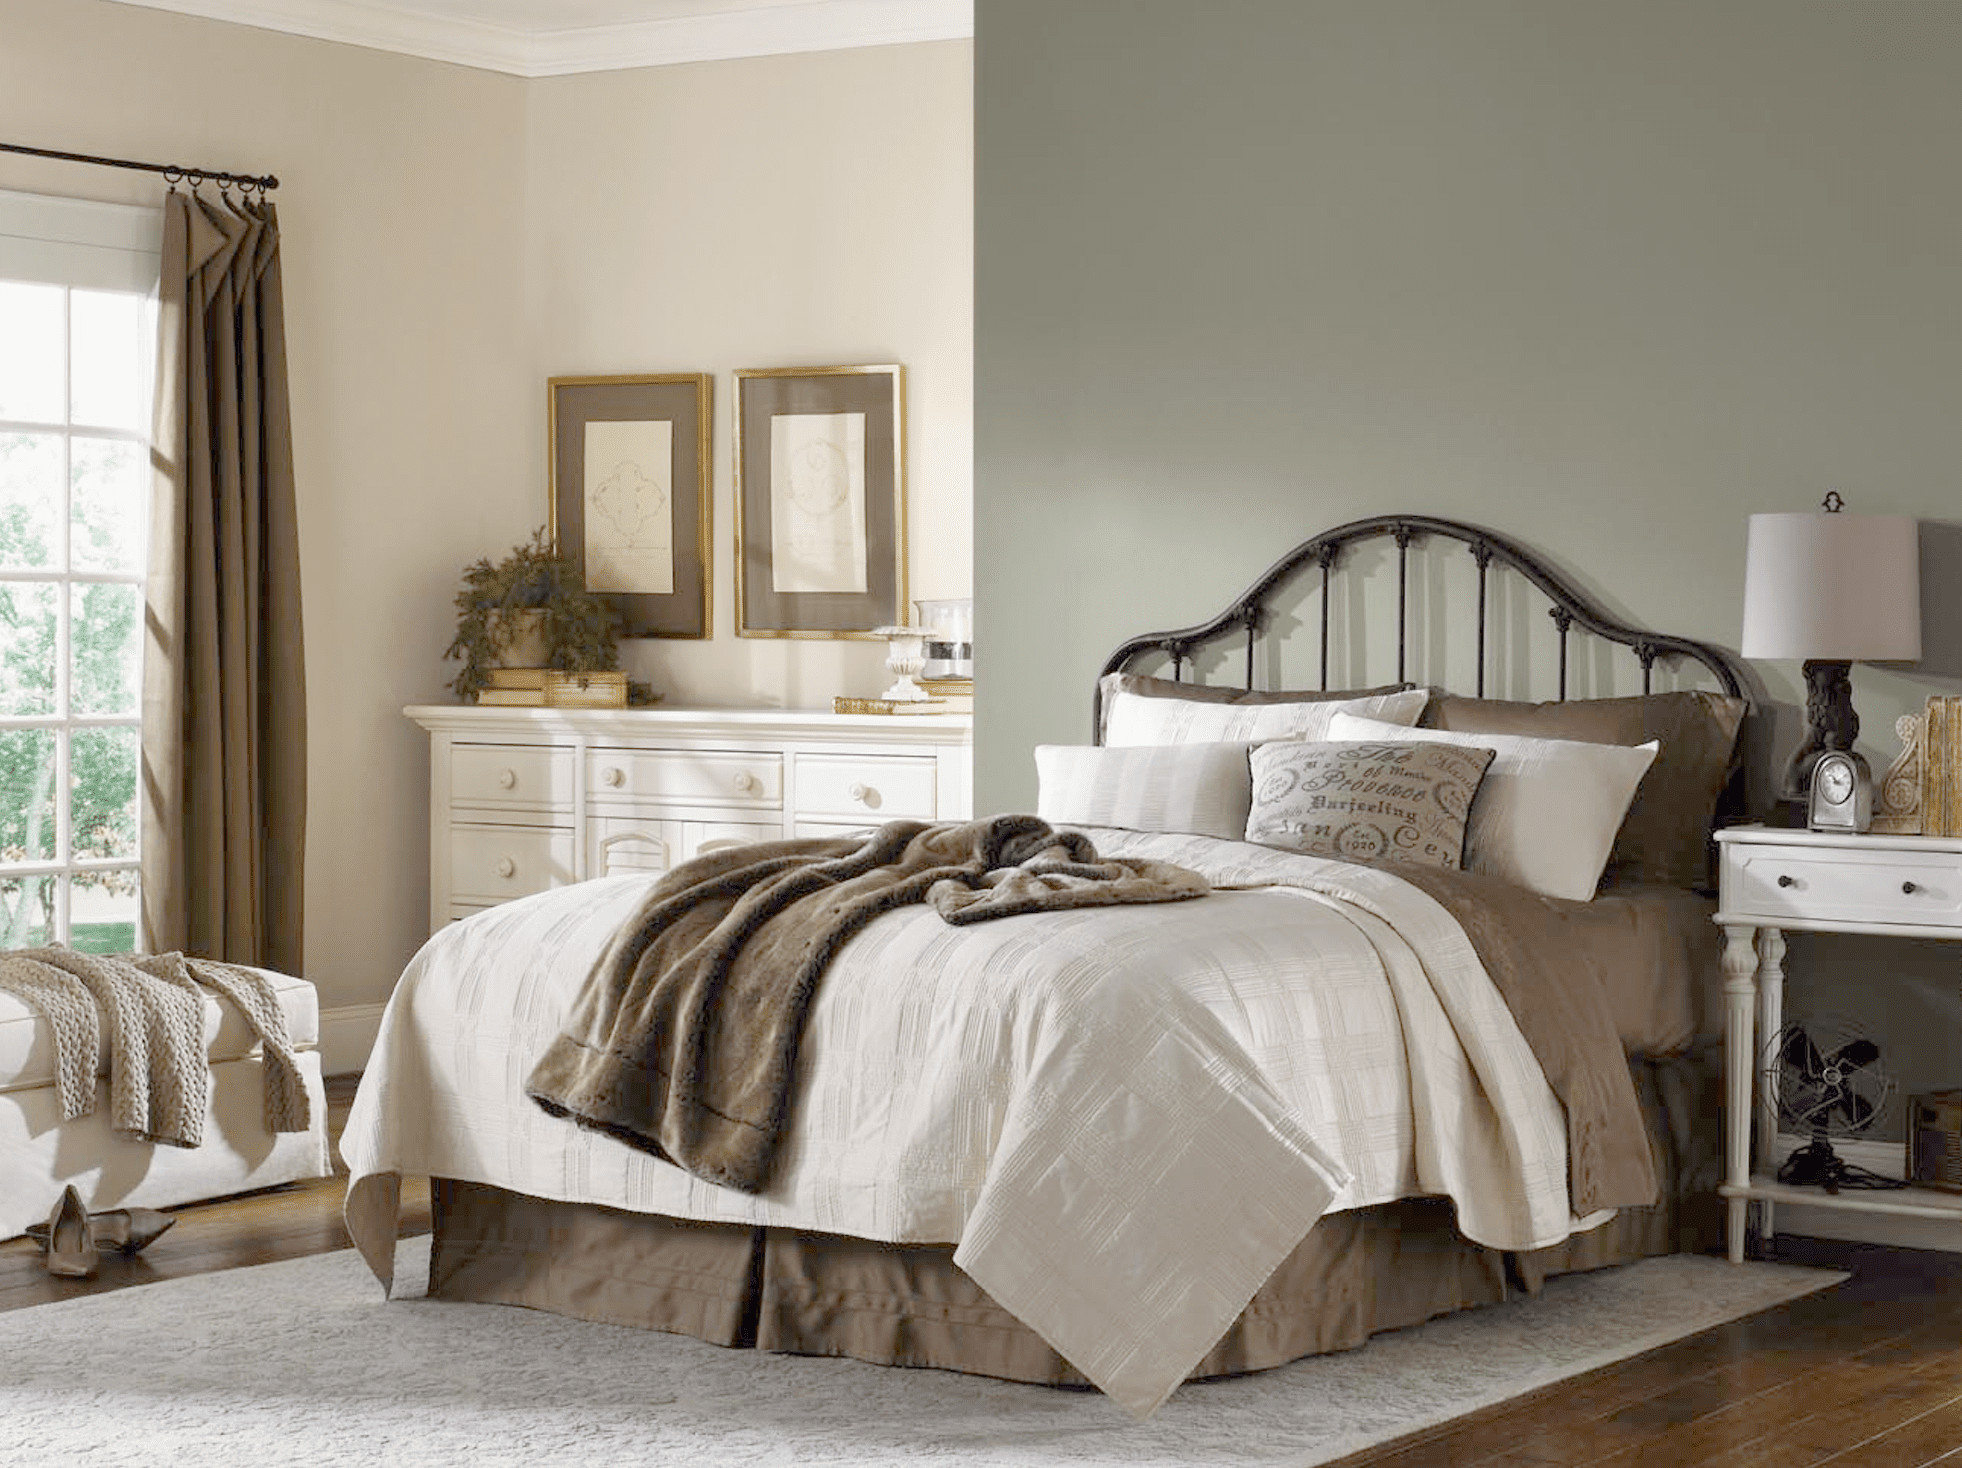 Bedroom Paint Colors
 8 Relaxing Sherwin Williams Paint Colors for Bedrooms